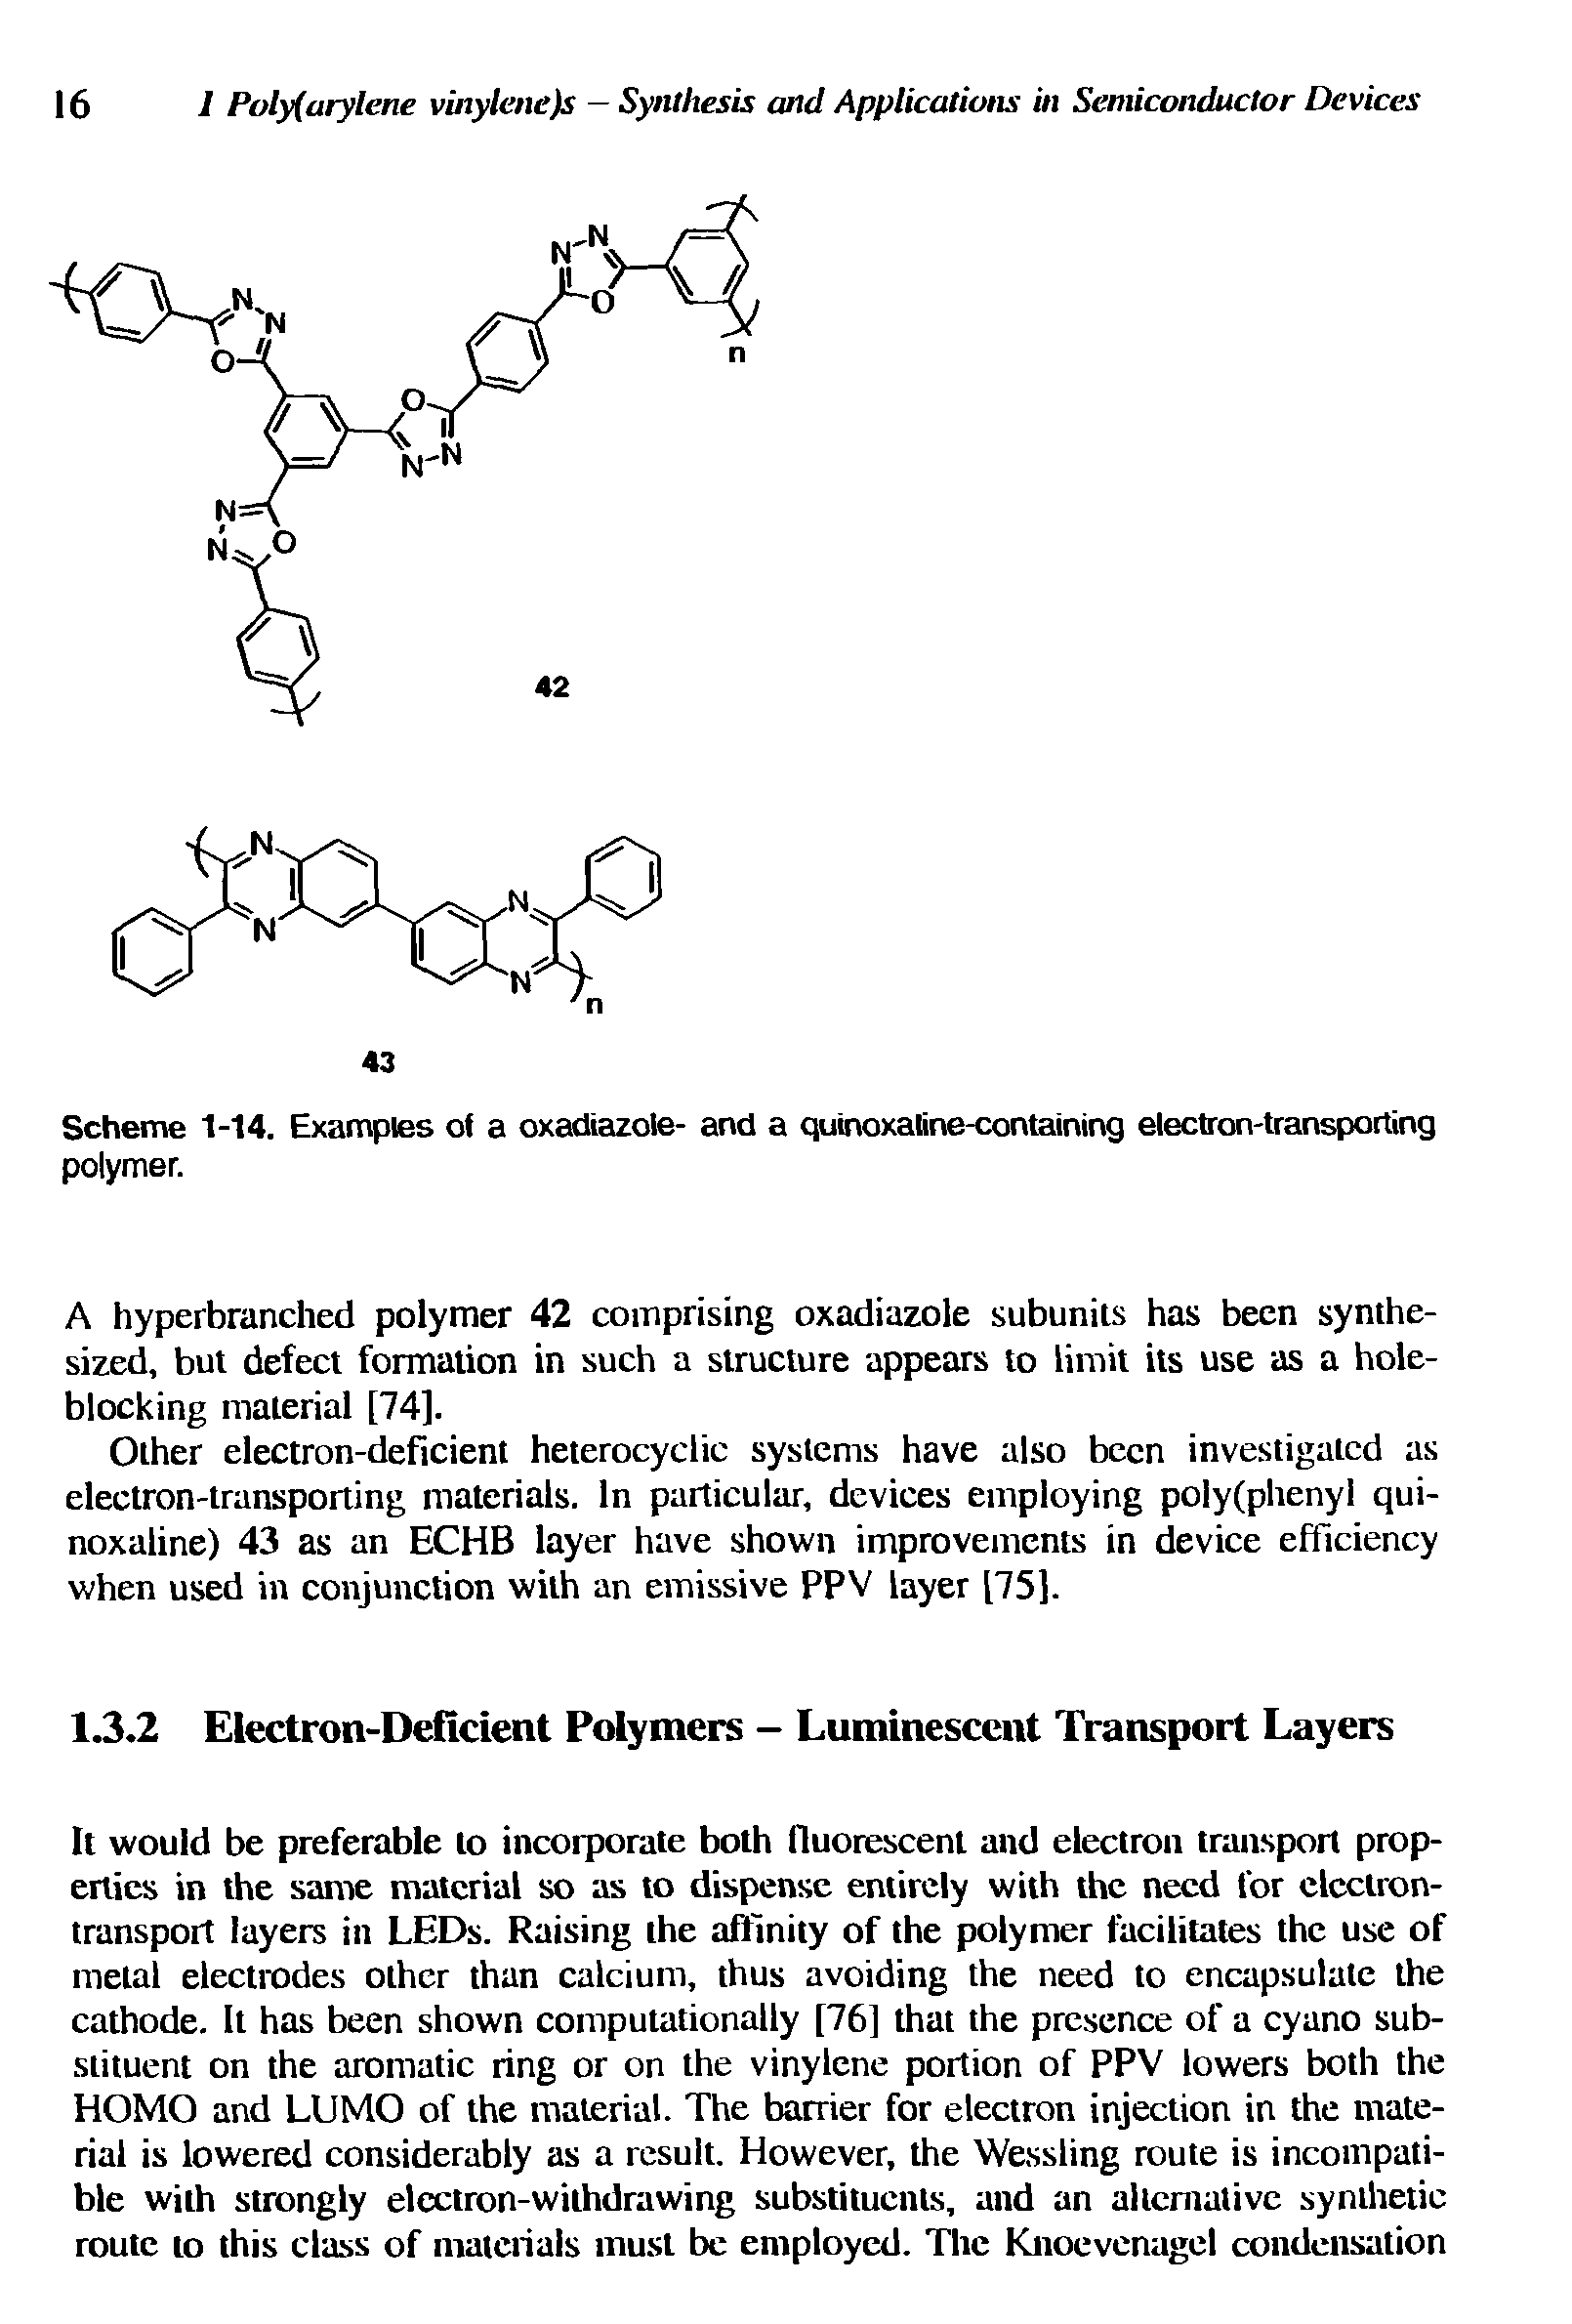 Scheme 1-14. Examples of a oxadiazole- and a quinoxatine-containing electron-transporting polymer.